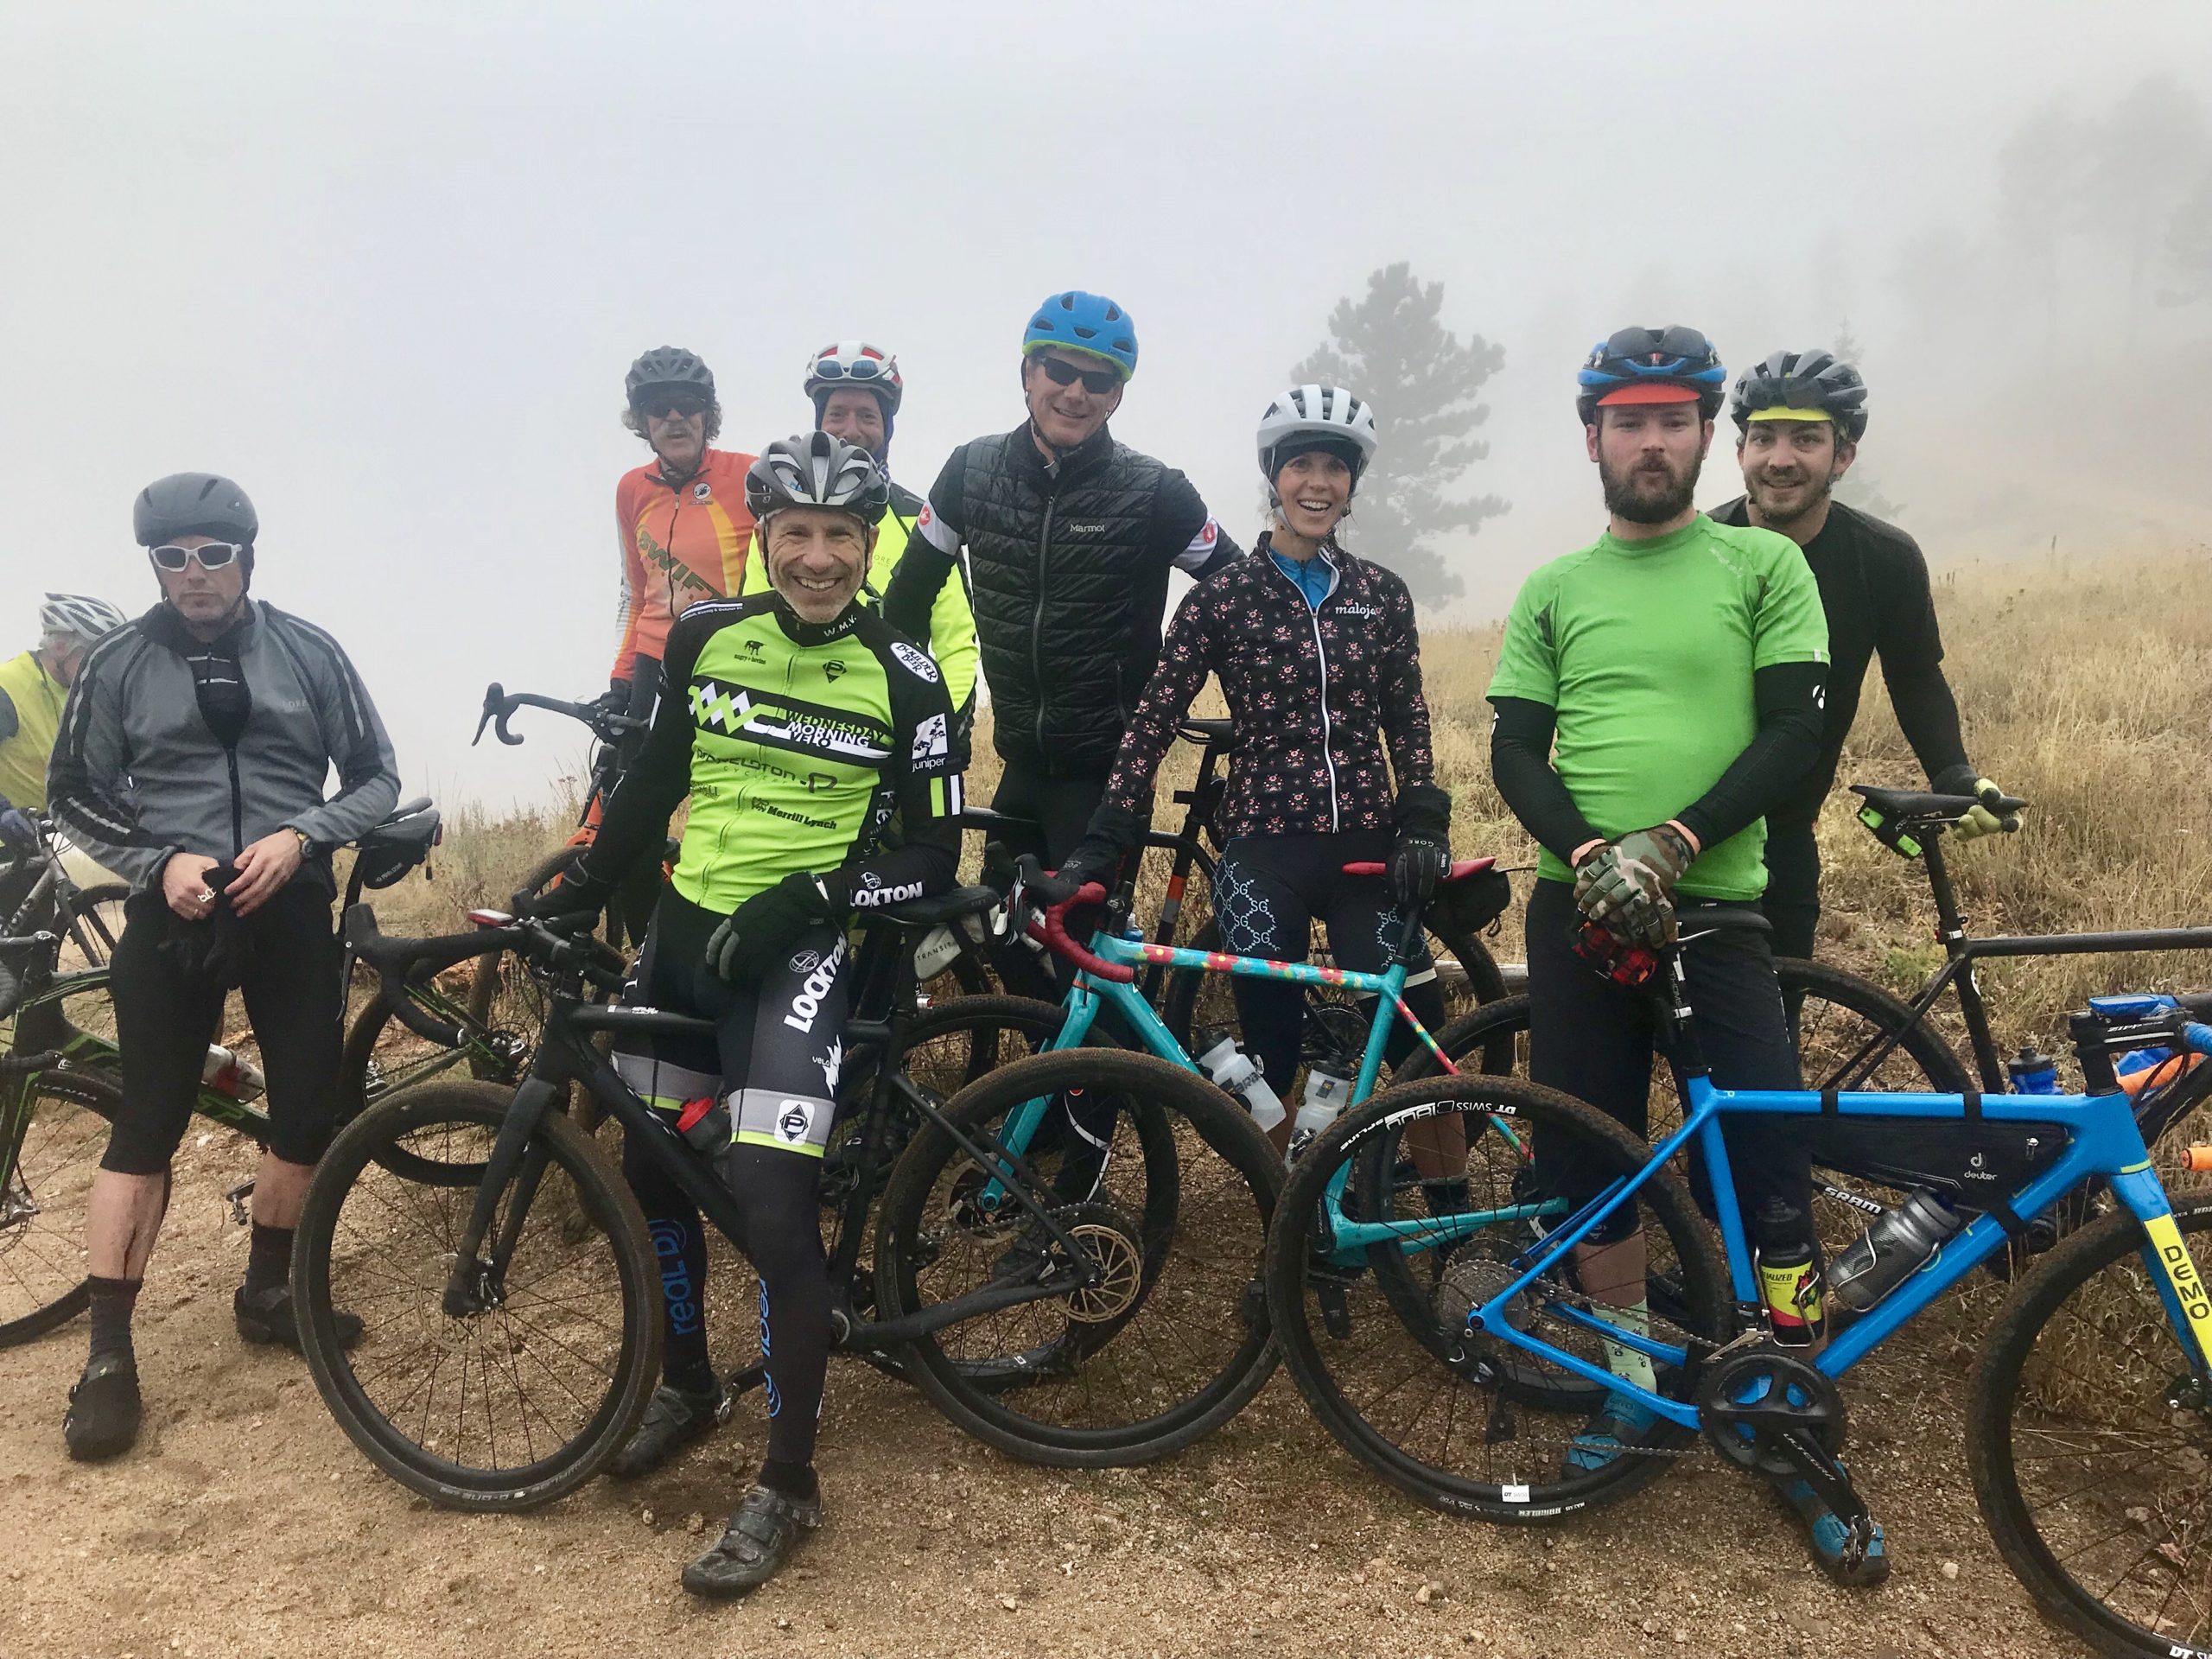 Group of cyclists at Gravelanche event